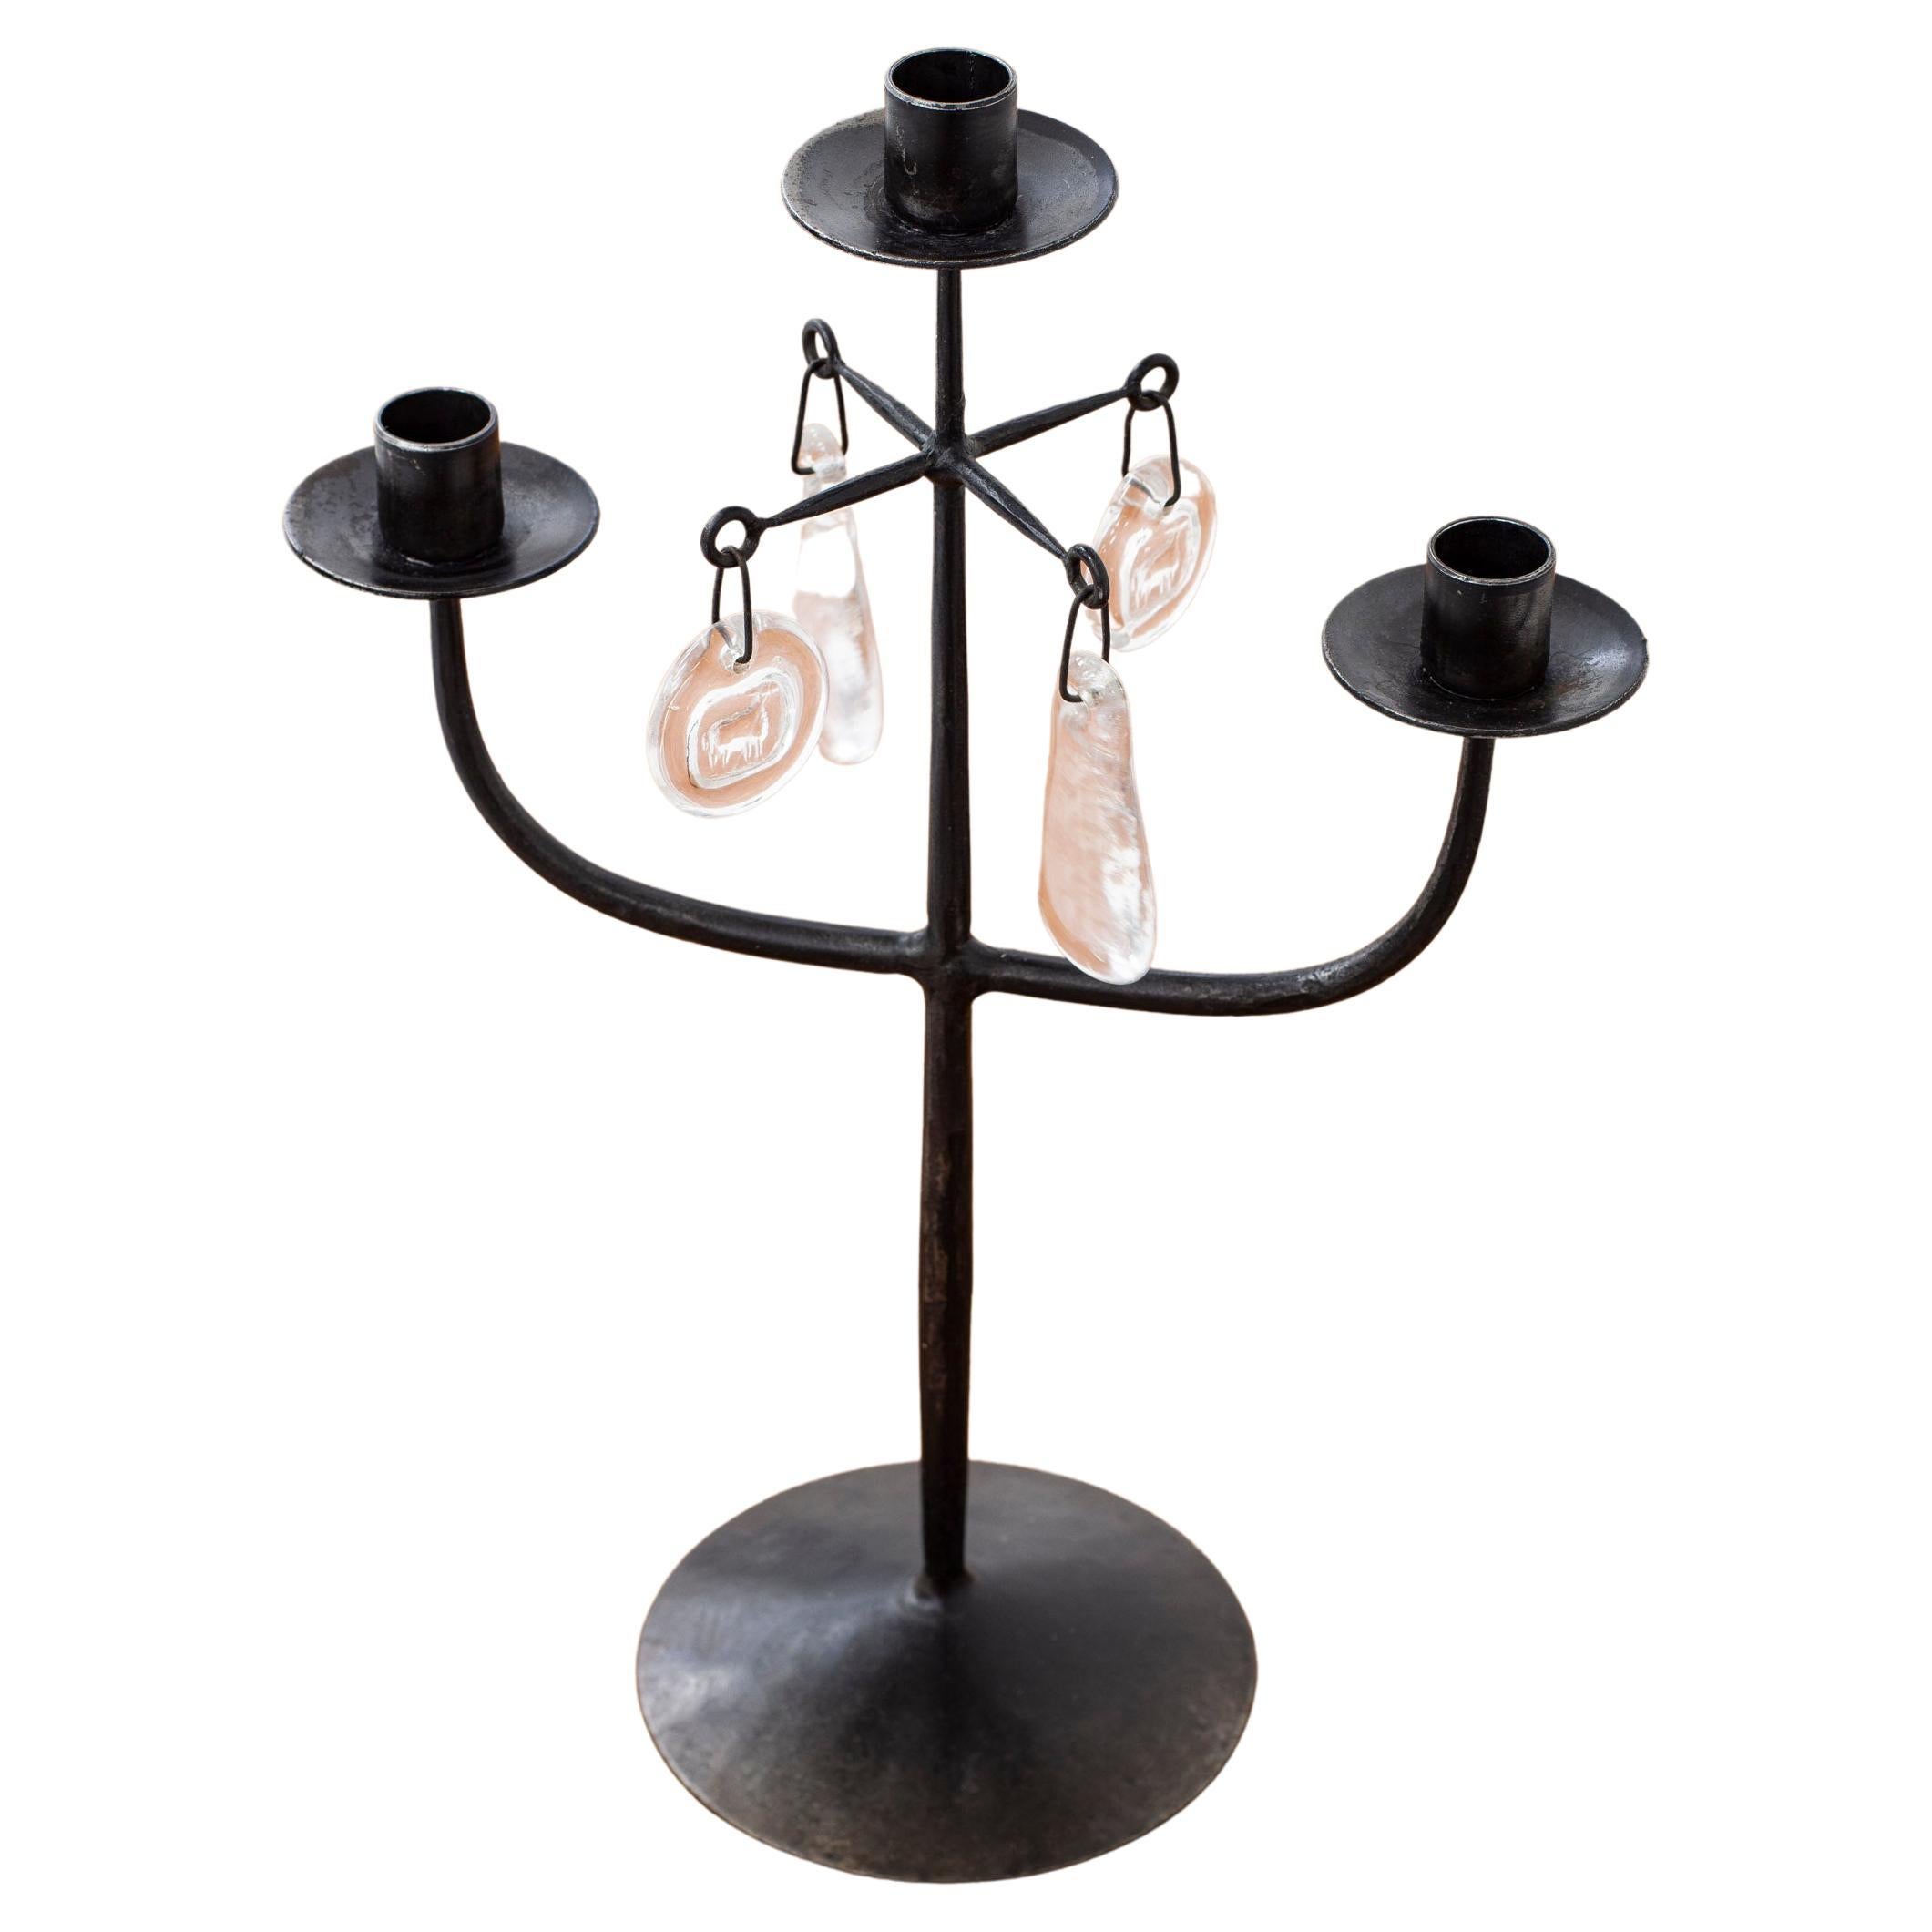 Candelabras in Forged Iron and Glass by Erik Höglund for Boda, Sweden, 1950s